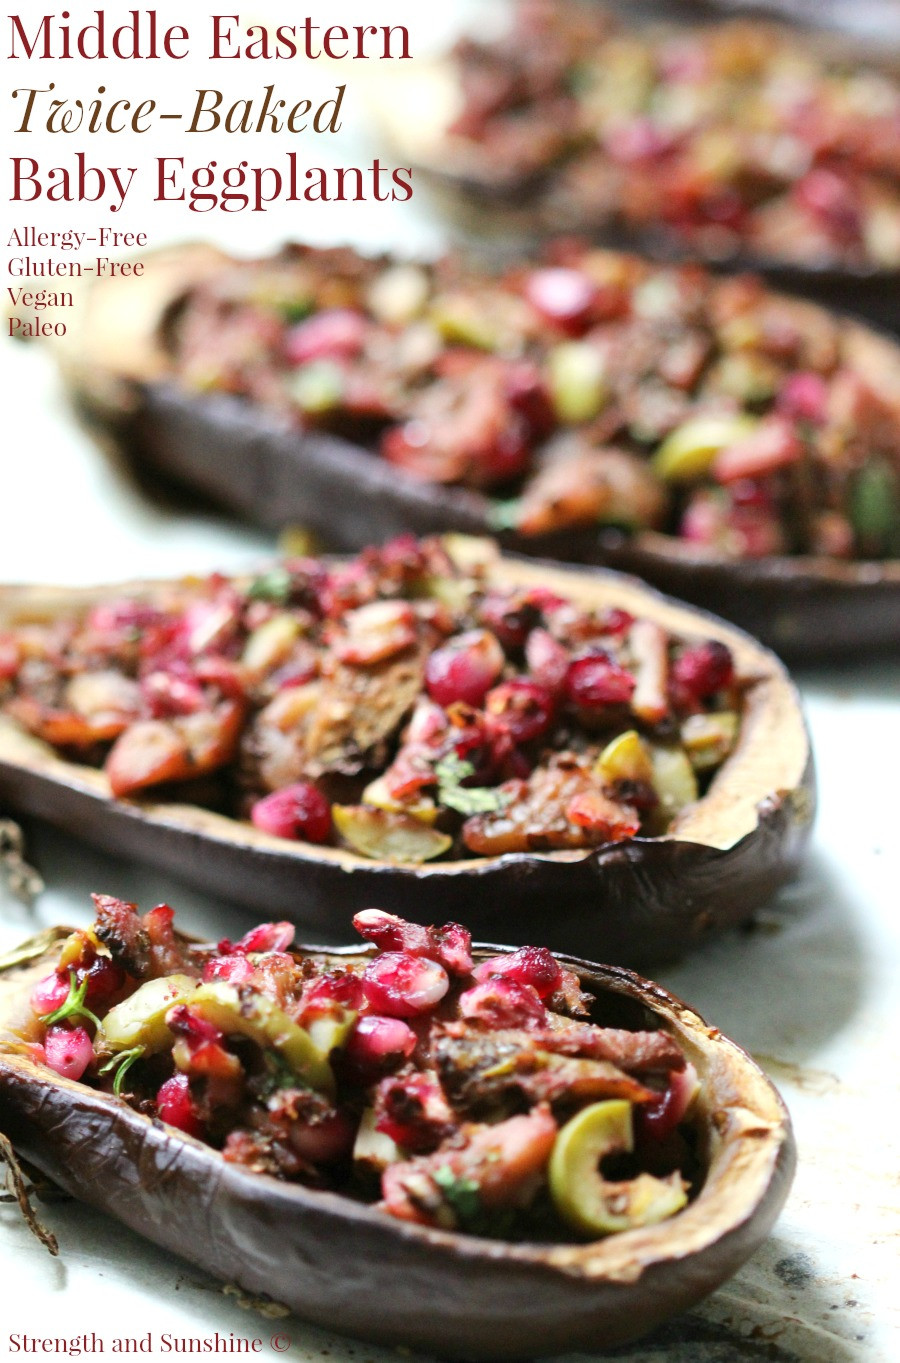 Middle Eastern Food Recipes
 Middle Eastern Twice Baked Baby Eggplants